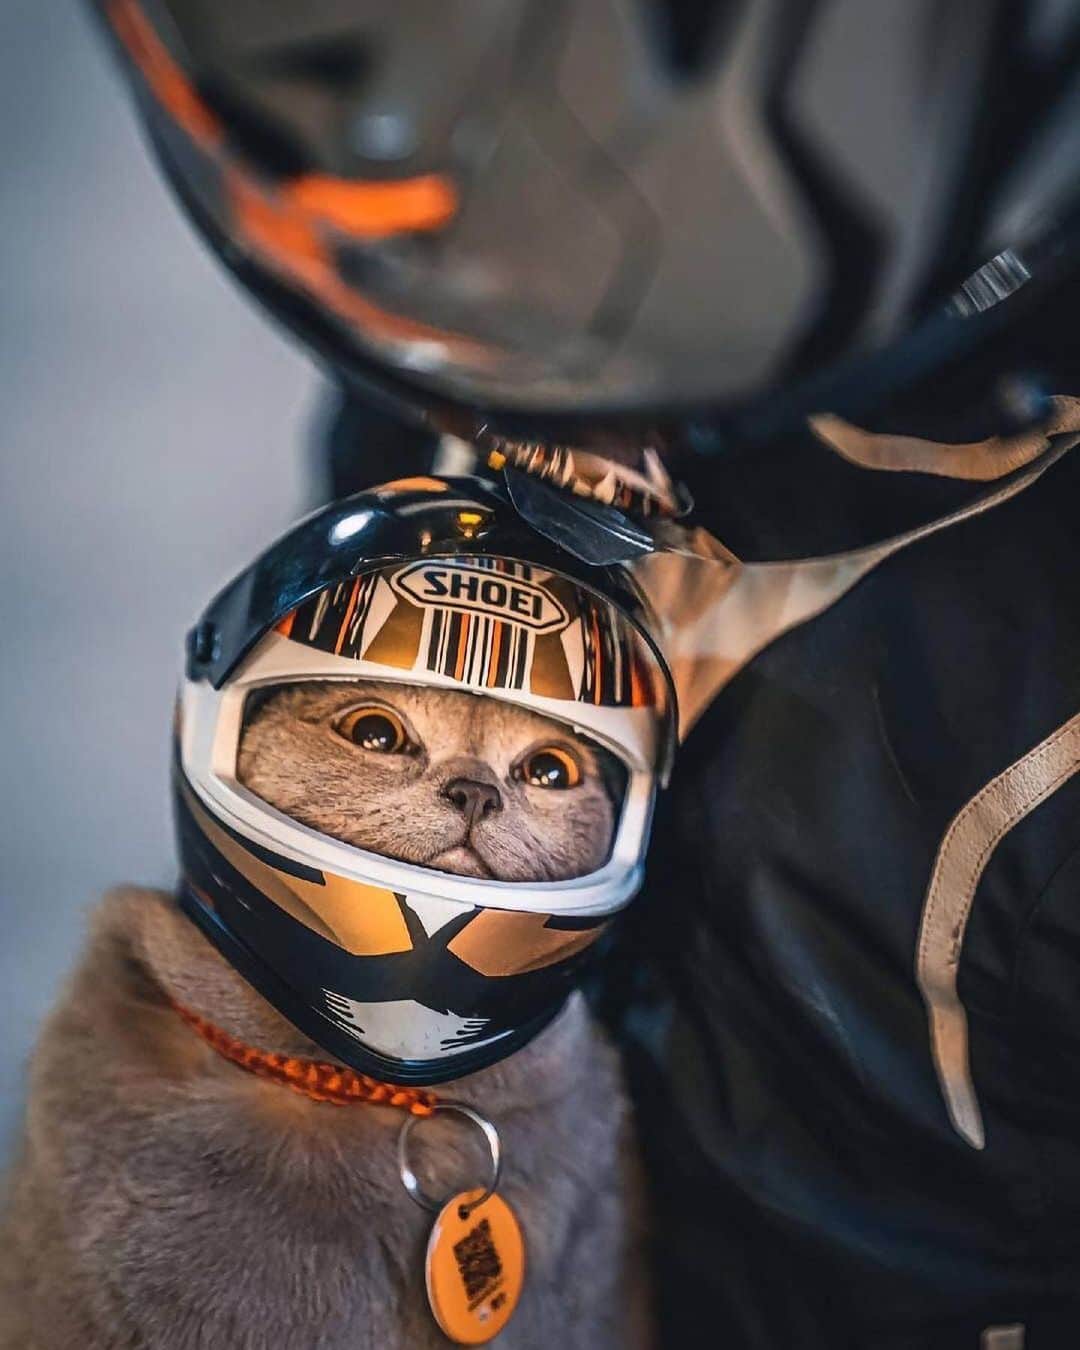 Cute Pets Dogs Catsさんのインスタグラム写真 - (Cute Pets Dogs CatsInstagram)「Those eyes 🥺  If you like it pls support with ❤️  Credit: beautiful lishiyin_ (tt) Check them out ☺️  ** For all crediting issues and removals pls 𝐄𝐦𝐚𝐢𝐥 𝐮𝐬 ☺️  𝐍𝐨𝐭𝐞: we don’t own this video/pics, all rights go to their respective owners. If owner is not provided, tagged (meaning we couldn’t find who is the owner), 𝐩𝐥𝐬 𝐄𝐦𝐚𝐢𝐥 𝐮𝐬 with 𝐬𝐮𝐛𝐣𝐞𝐜𝐭 “𝐂𝐫𝐞𝐝𝐢𝐭 𝐈𝐬𝐬𝐮𝐞𝐬” and 𝐨𝐰𝐧𝐞𝐫 𝐰𝐢𝐥𝐥 𝐛𝐞 𝐭𝐚𝐠𝐠𝐞𝐝 𝐬𝐡𝐨𝐫𝐭𝐥𝐲 𝐚𝐟𝐭𝐞𝐫.  We have been building this community for over 6 years, but 𝐞𝐯𝐞𝐫𝐲 𝐫𝐞𝐩𝐨𝐫𝐭 𝐜𝐨𝐮𝐥𝐝 𝐠𝐞𝐭 𝐨𝐮𝐫 𝐩𝐚𝐠𝐞 𝐝𝐞𝐥𝐞𝐭𝐞𝐝, pls email us first. **」6月26日 22時43分 - dailycatclub